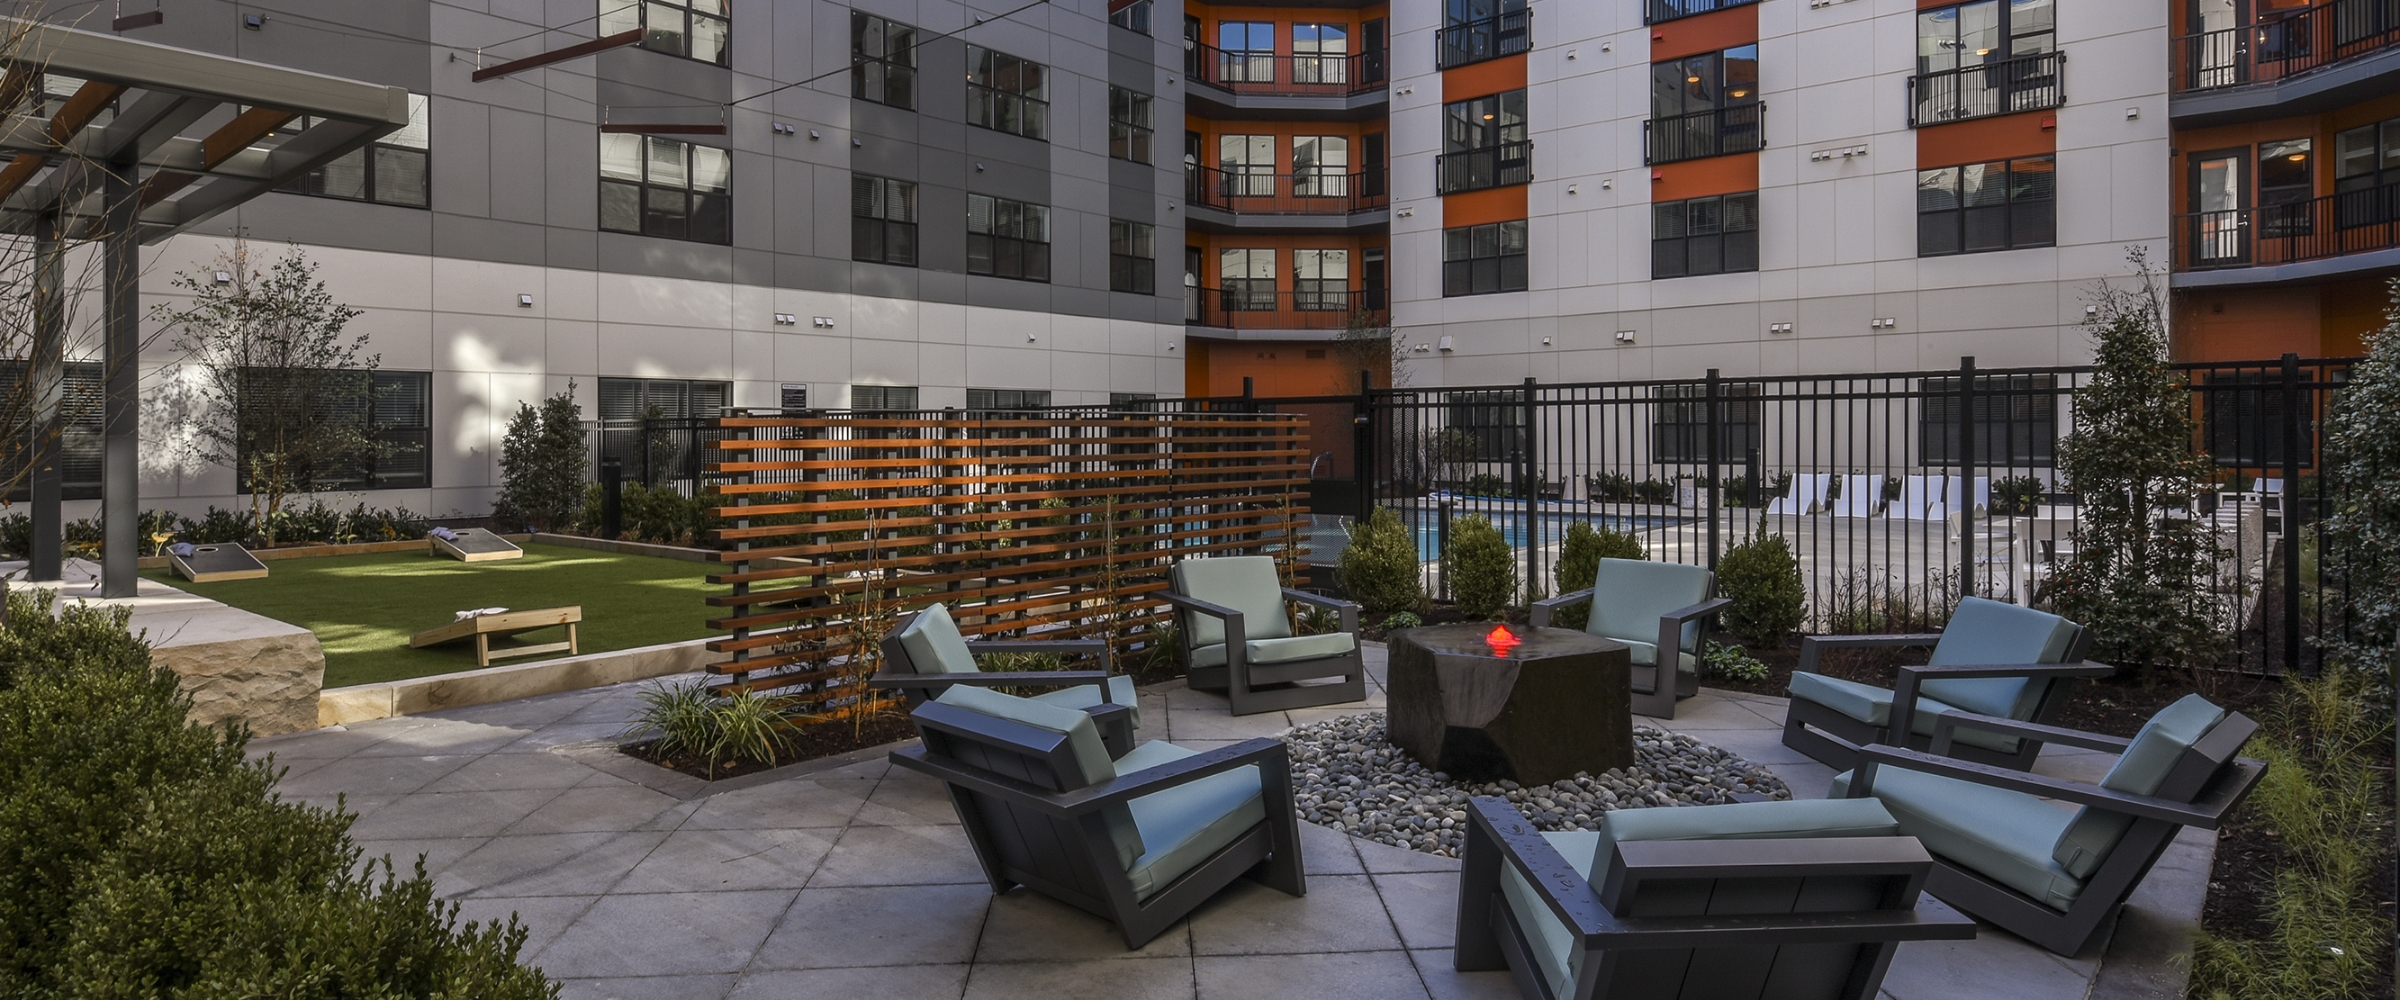 Courtyard with patio furniture and fireplace at our apartments for rent in Federal Hill.